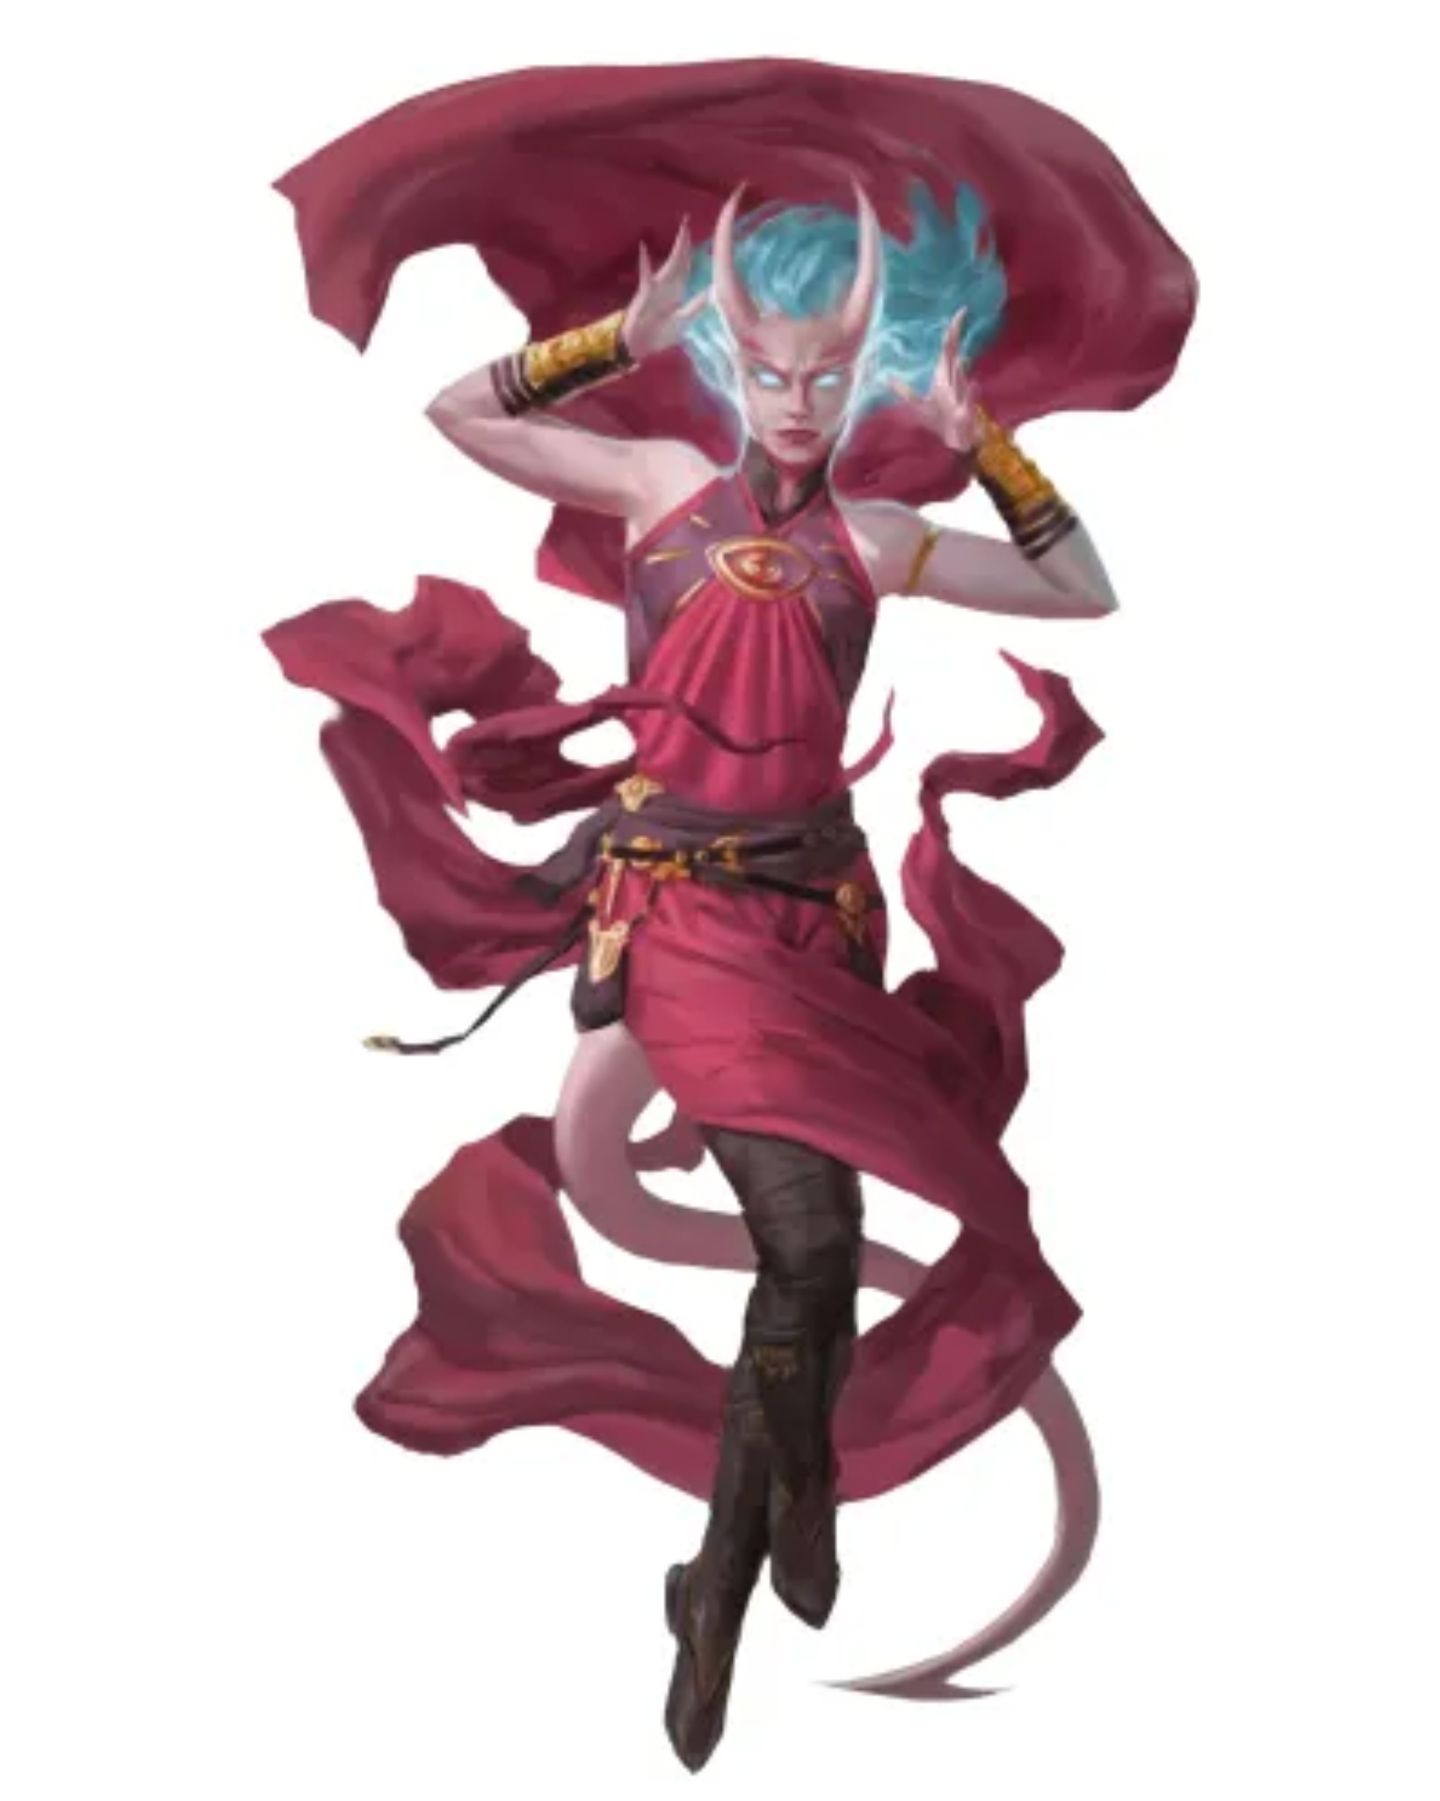 A Tiefling in red flowing clothing with glowing blue eyes activates her aberrant mind powers.